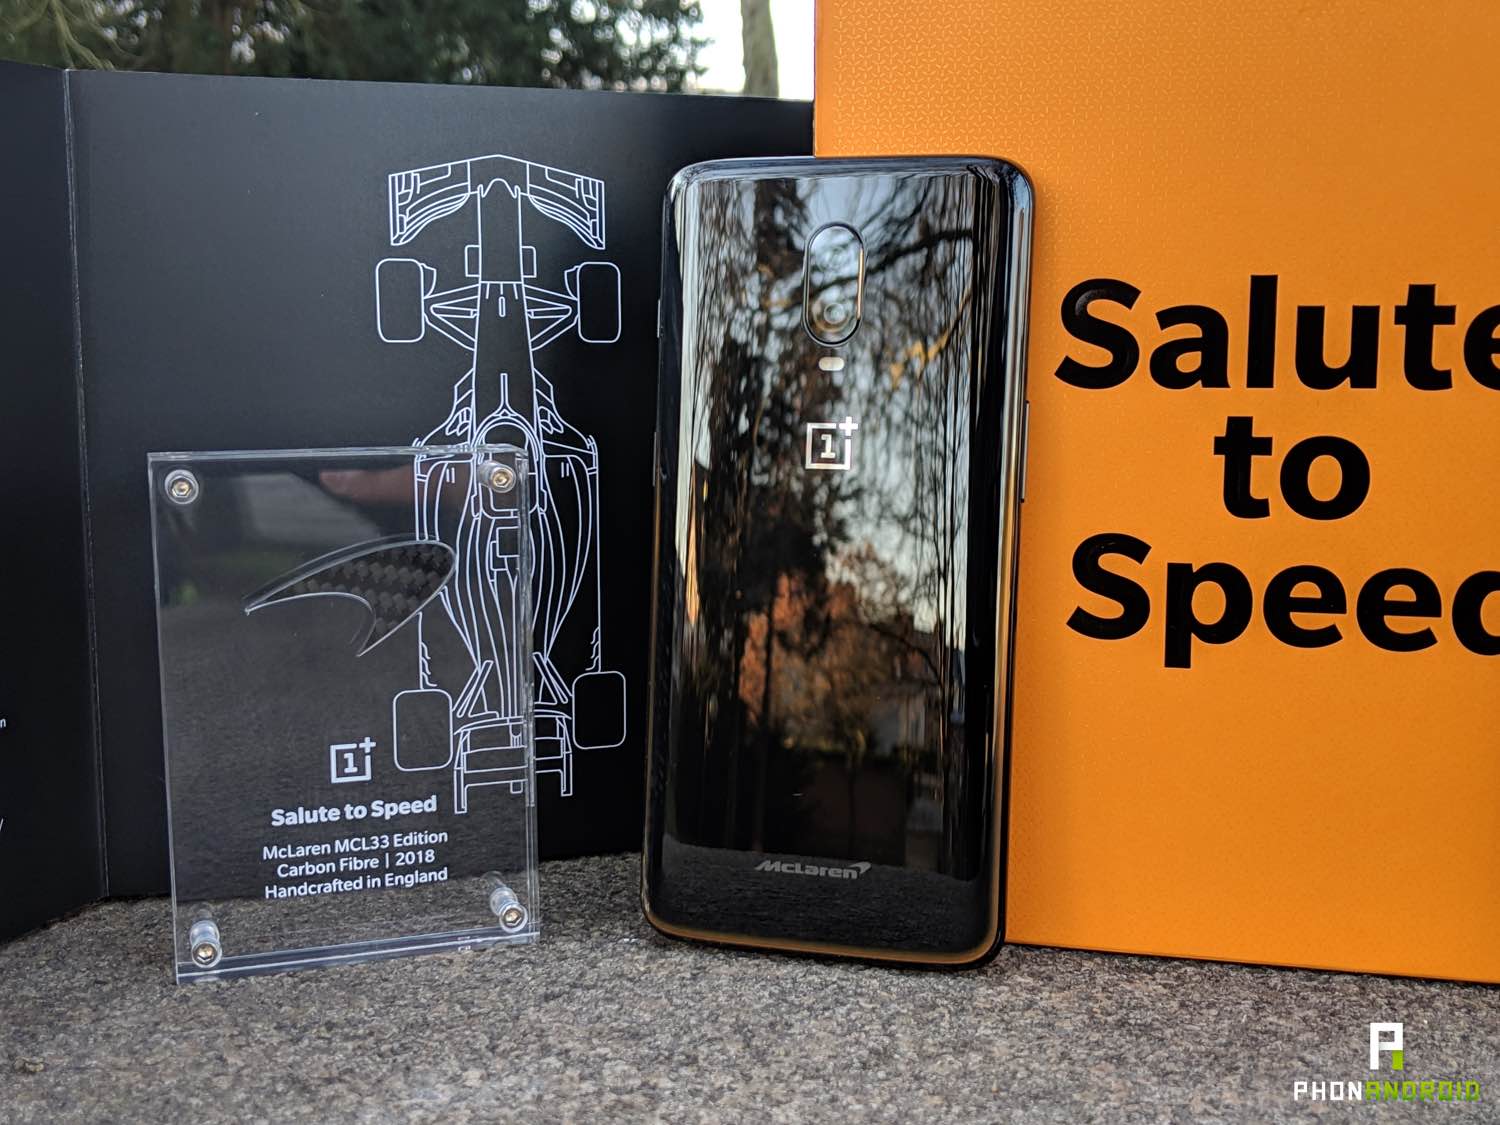 test oneplus 6t McLaren edition review